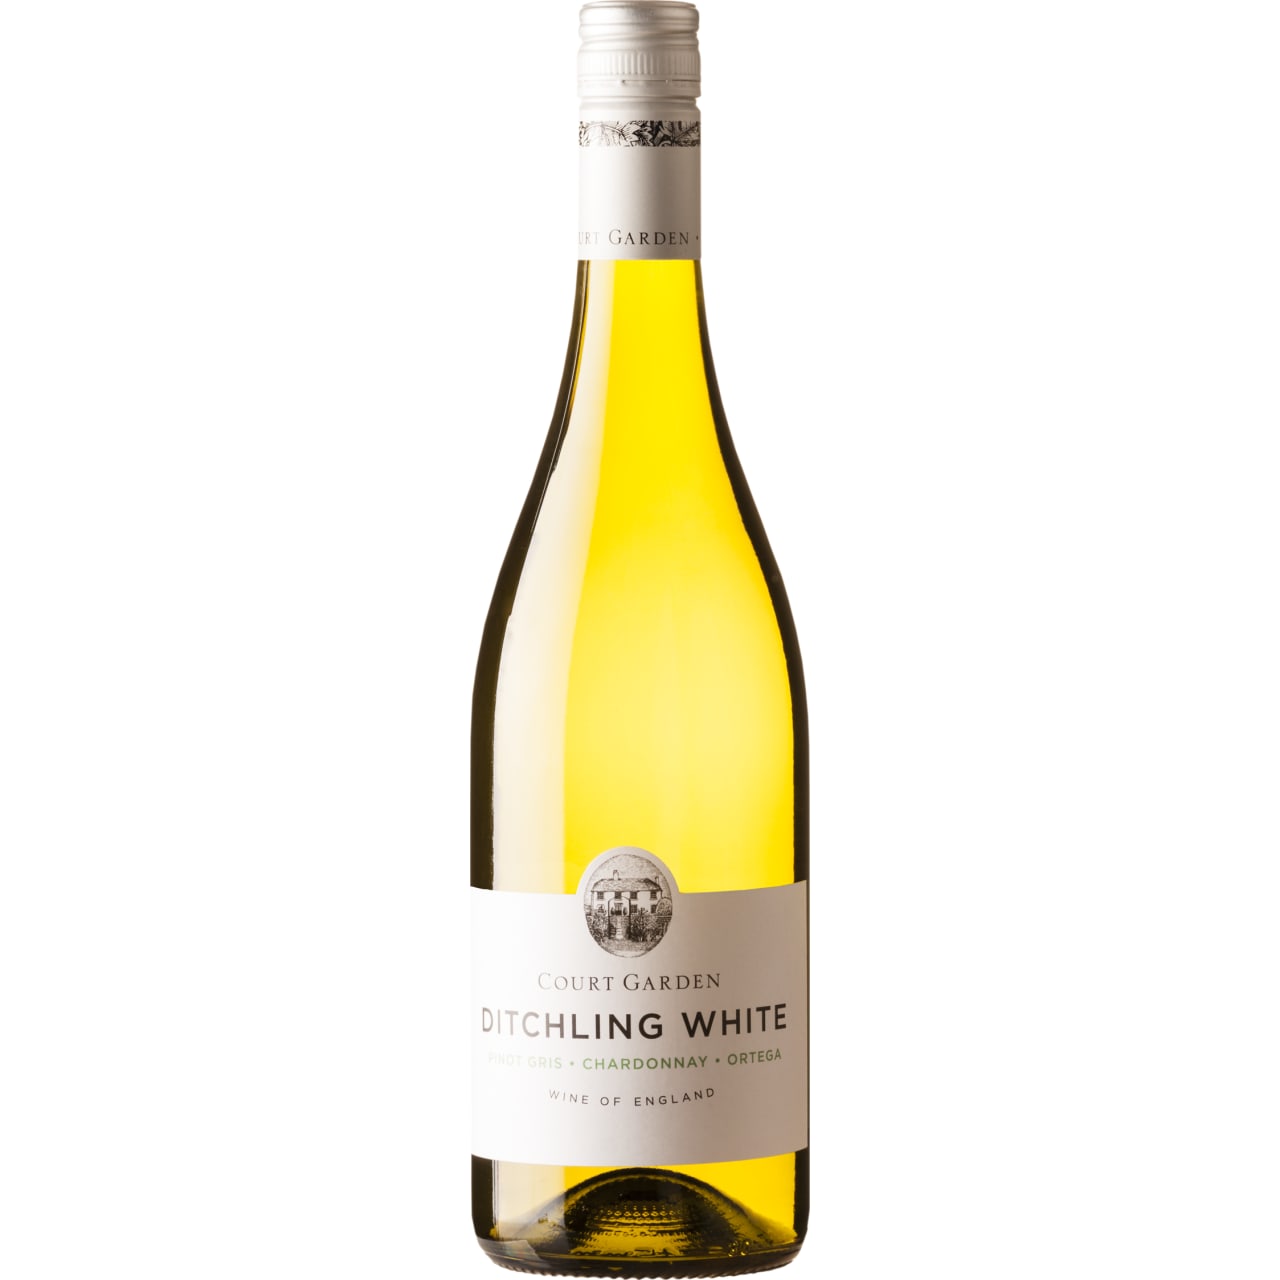 This Court Garden Ditchling White is a delicious blend of Pinot Gris, Chardonnay and Ortega.